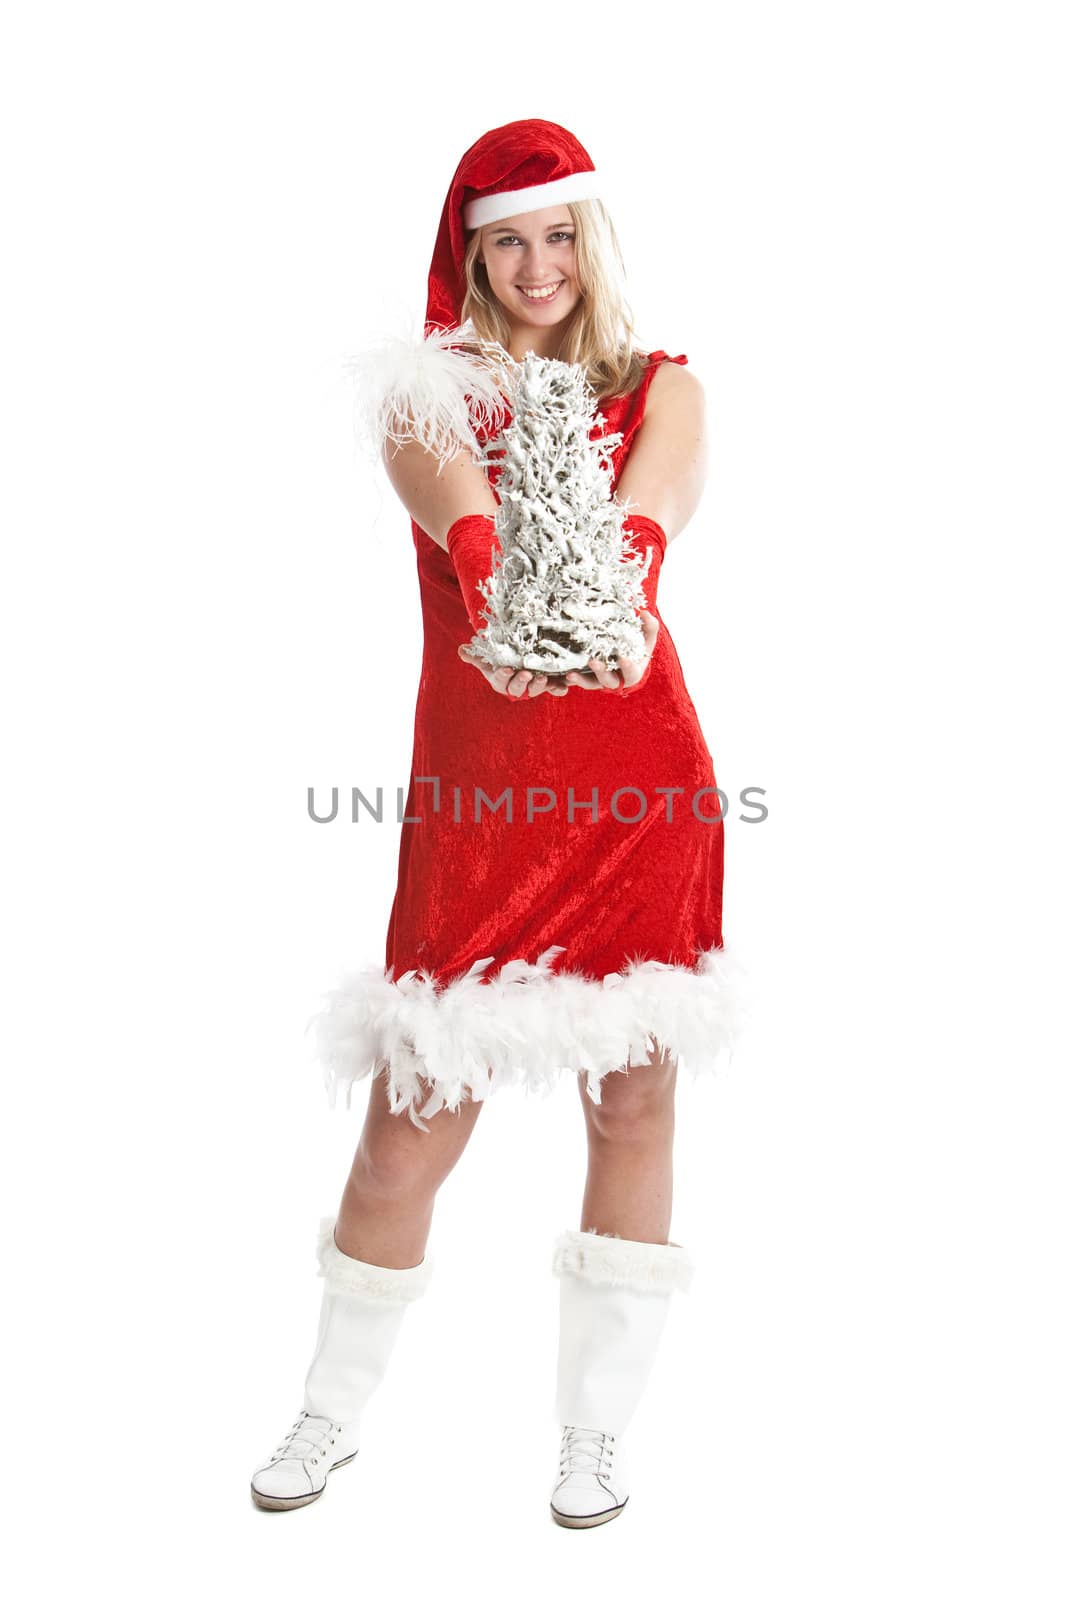 Pretty young blond girl in christmas outfit with tree